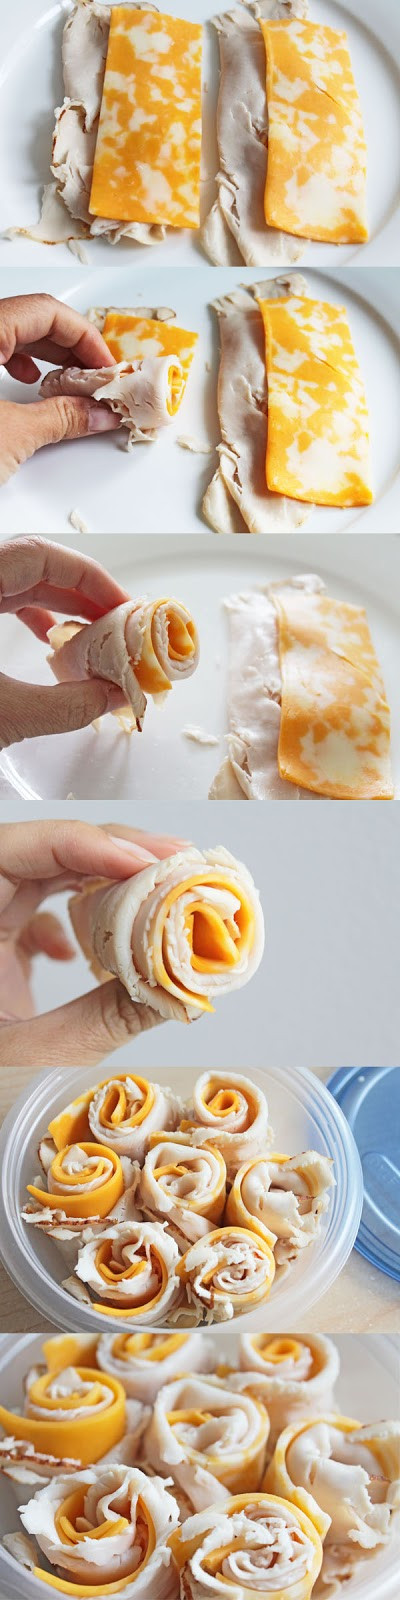 Homemade Healthy Snacks For Adults
 Easy to Make Snacks Turkey and Cheese Rolls Recipe